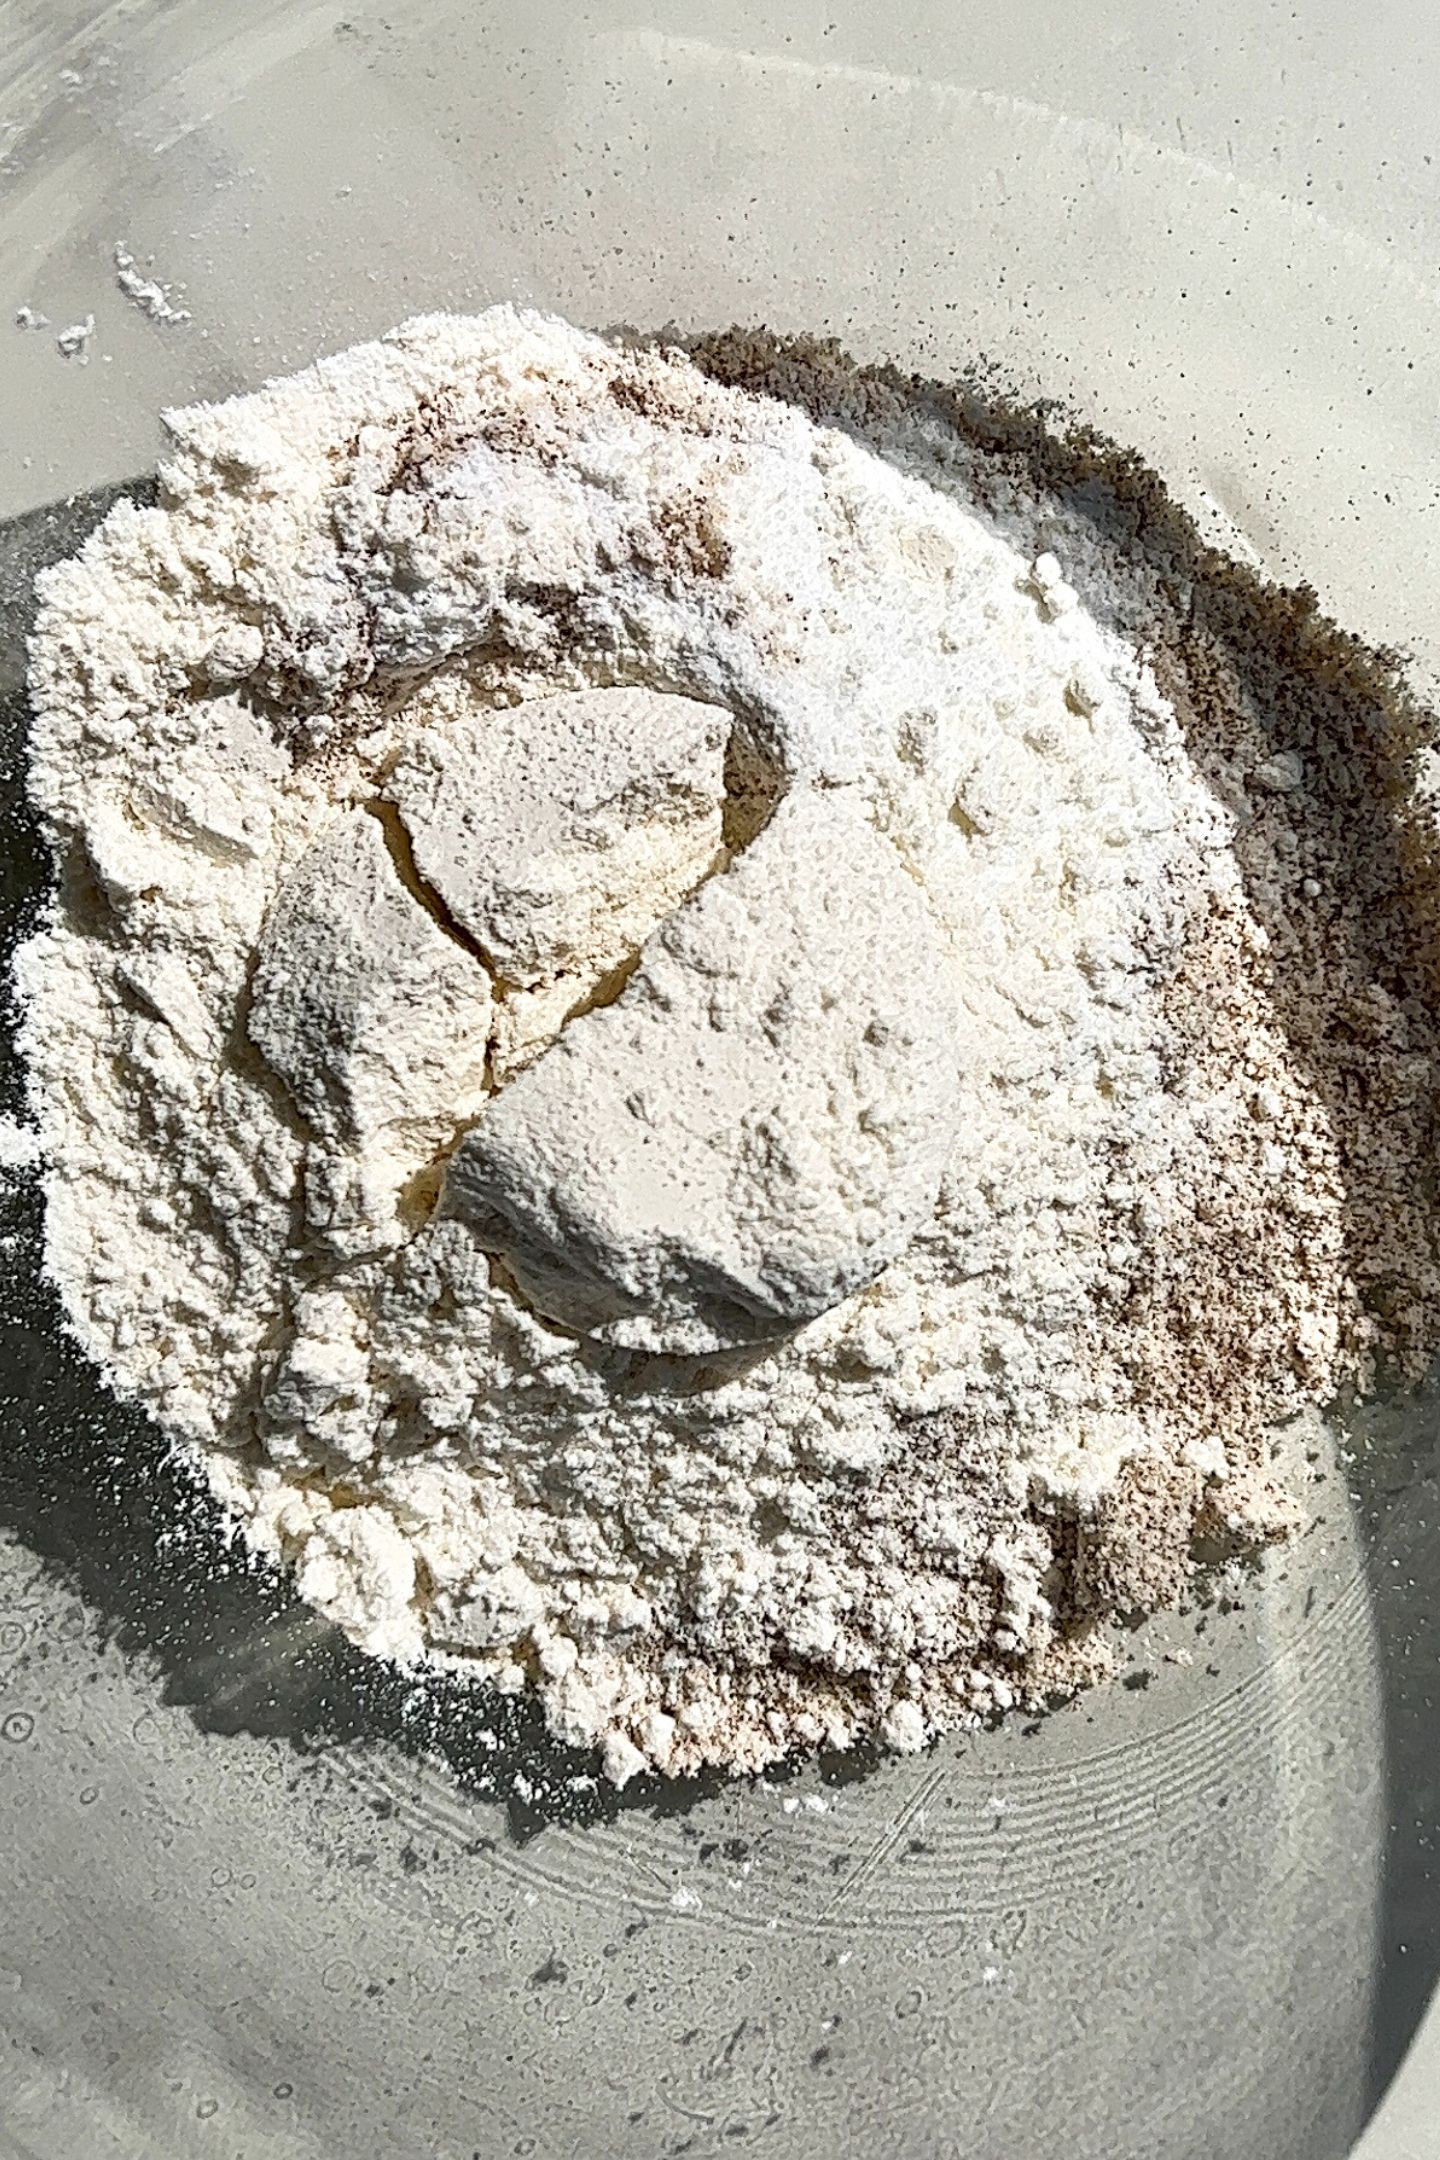 Dry ingredients in a bowl